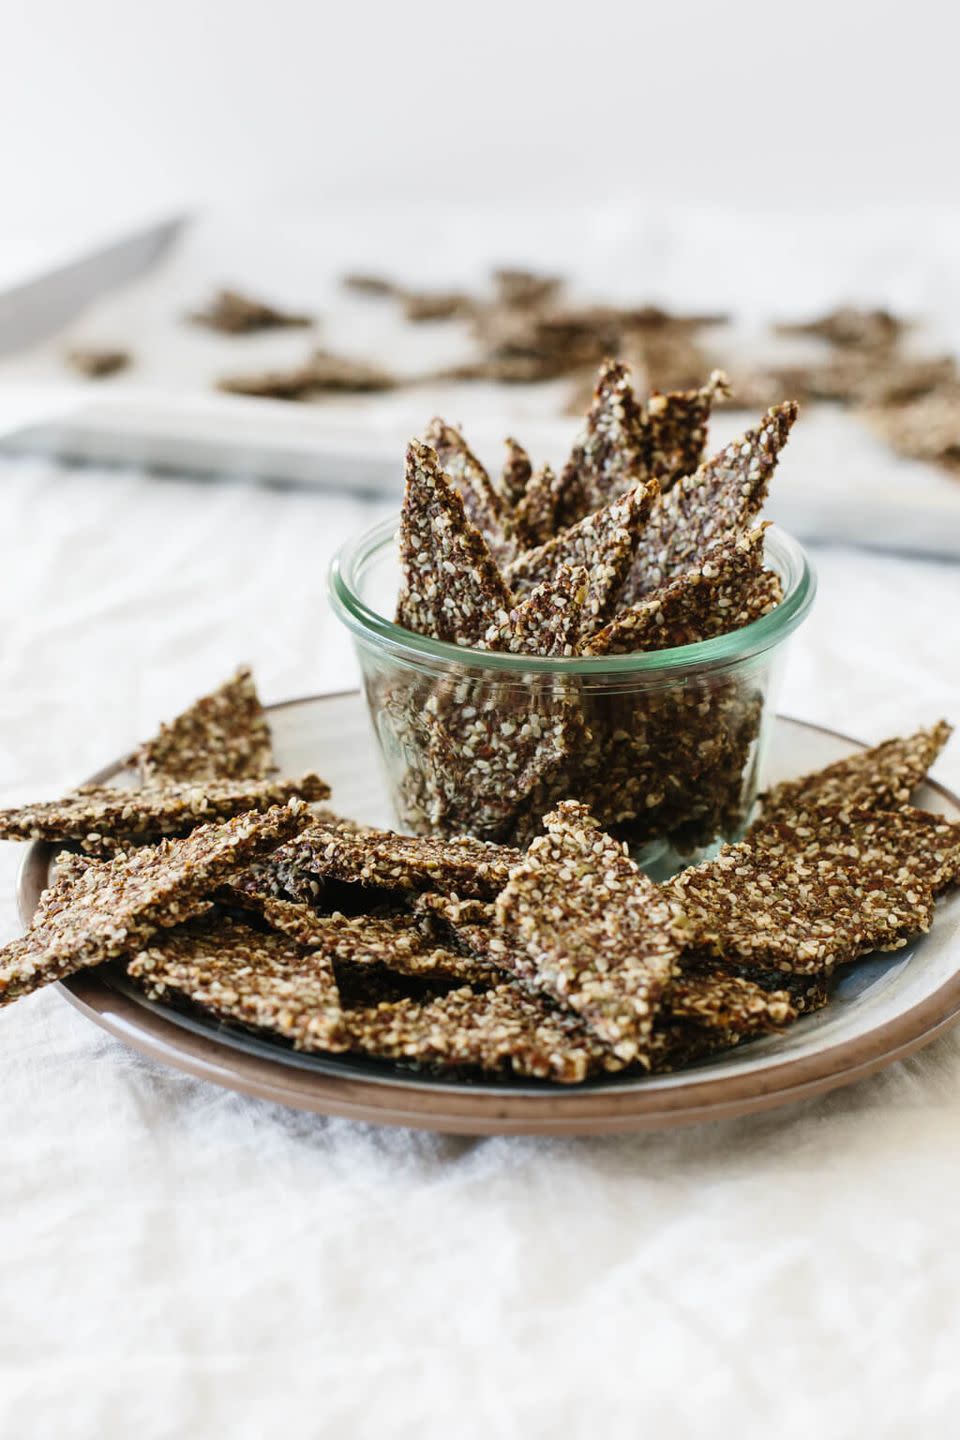 Transform into seed crackers.